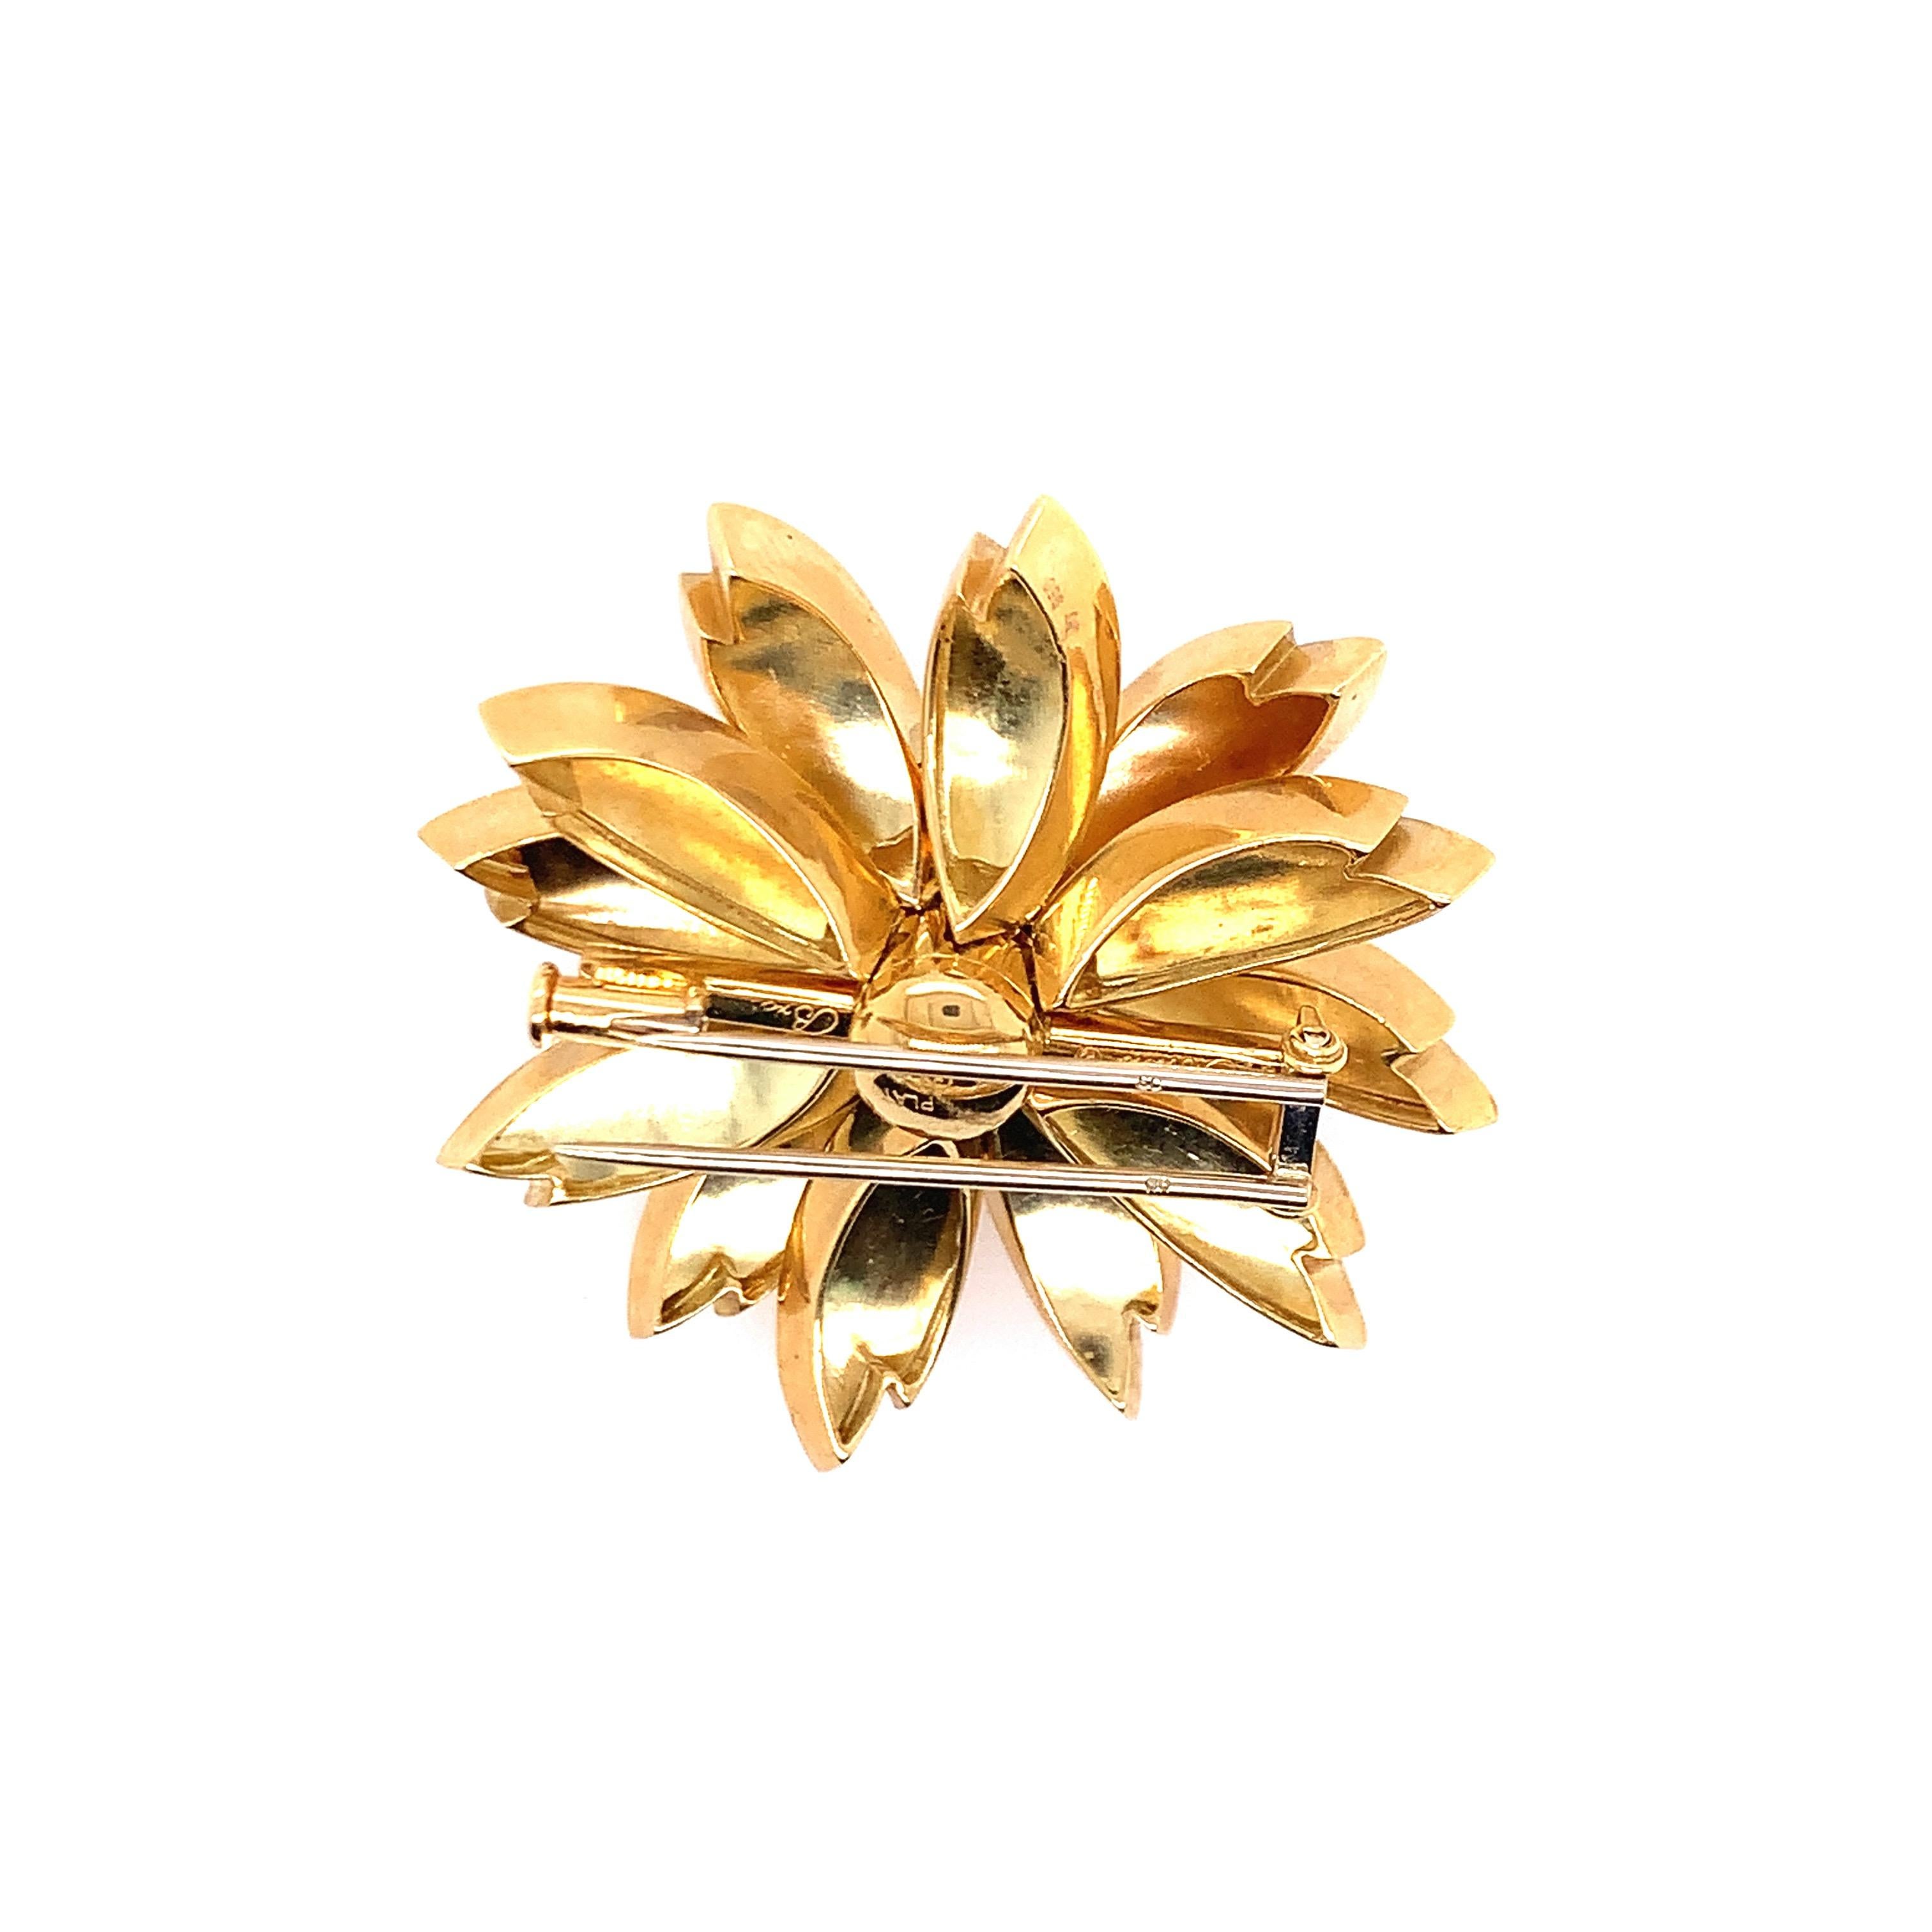 An Aletto Brothers creation, this floral brooch is made of diamonds and sapphire set on 18 karat yellow gold. There are 13 round sapphires that weigh approximately  1.50 carats, and there are 6 collet-set round diamonds that weigh approximately 0.40